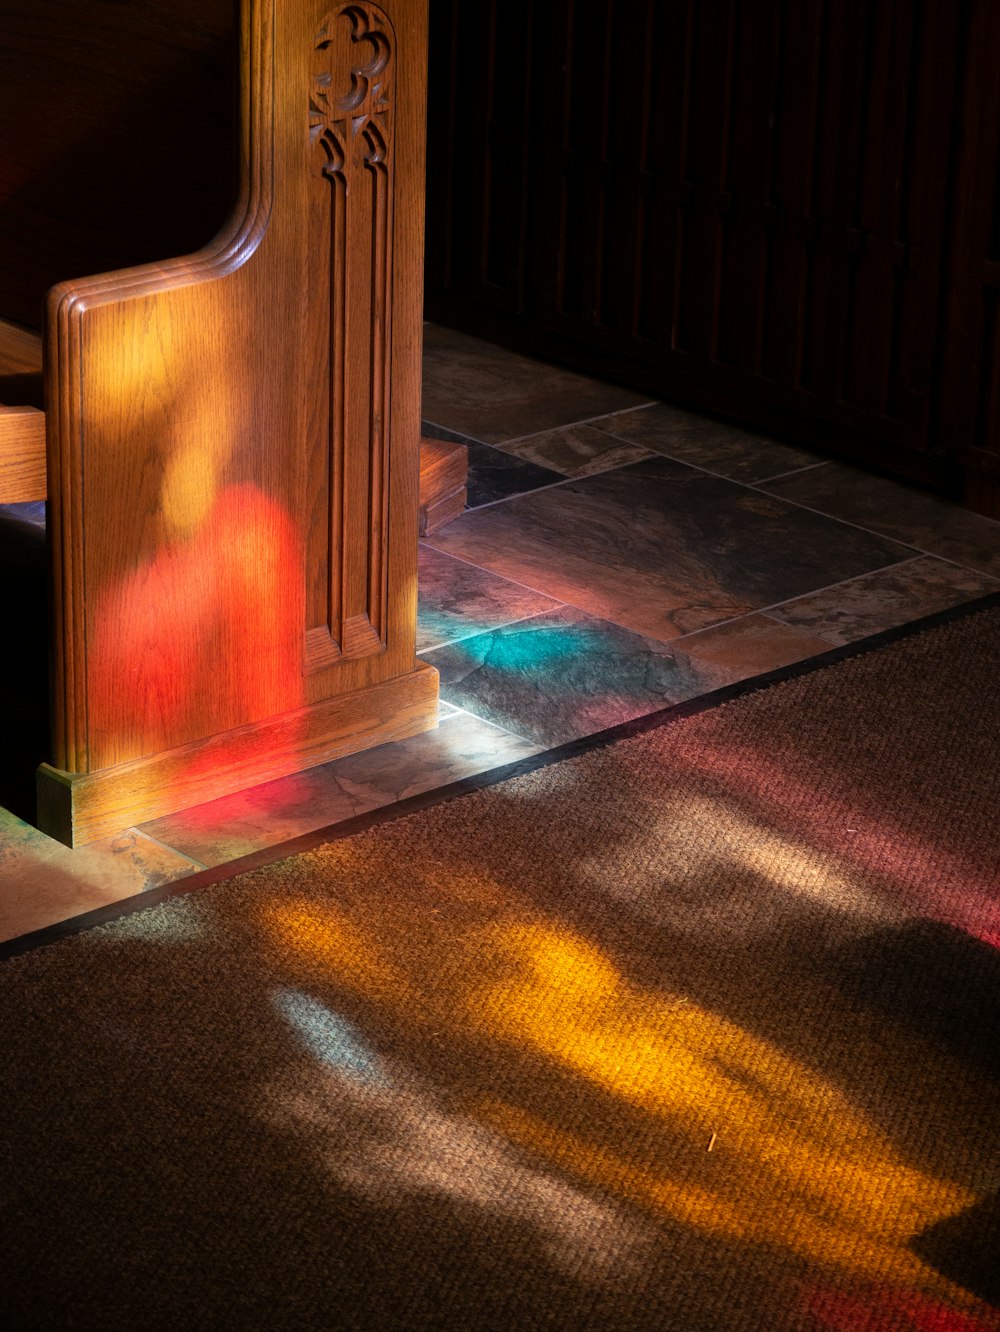 the sunlight is shining through the stained glass